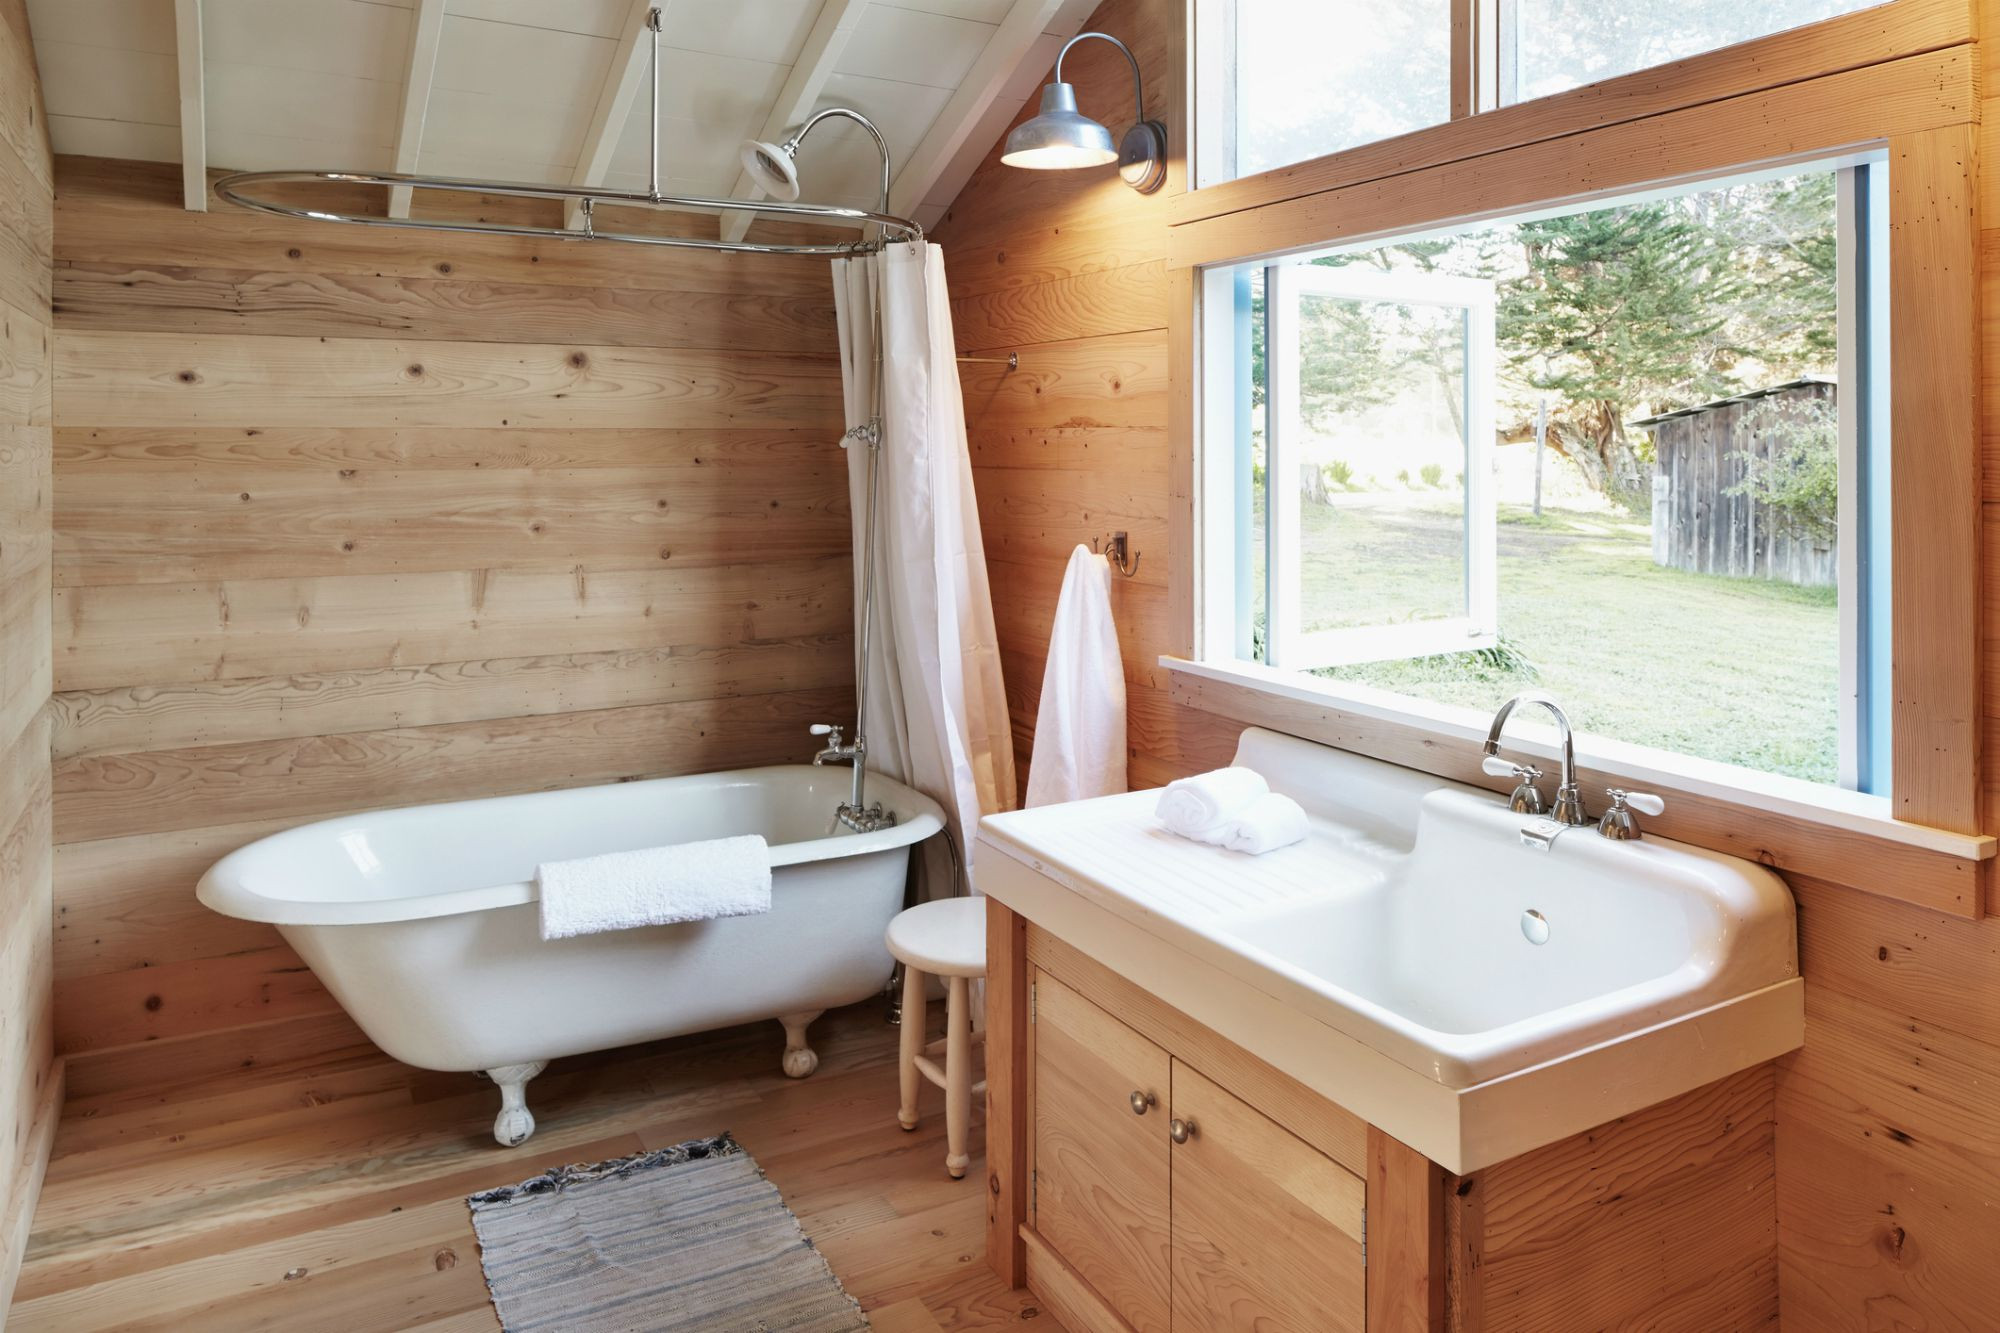 Woodsy Bathroom Decor
 8 Bathrooms That Nail the Natural Wood Trend